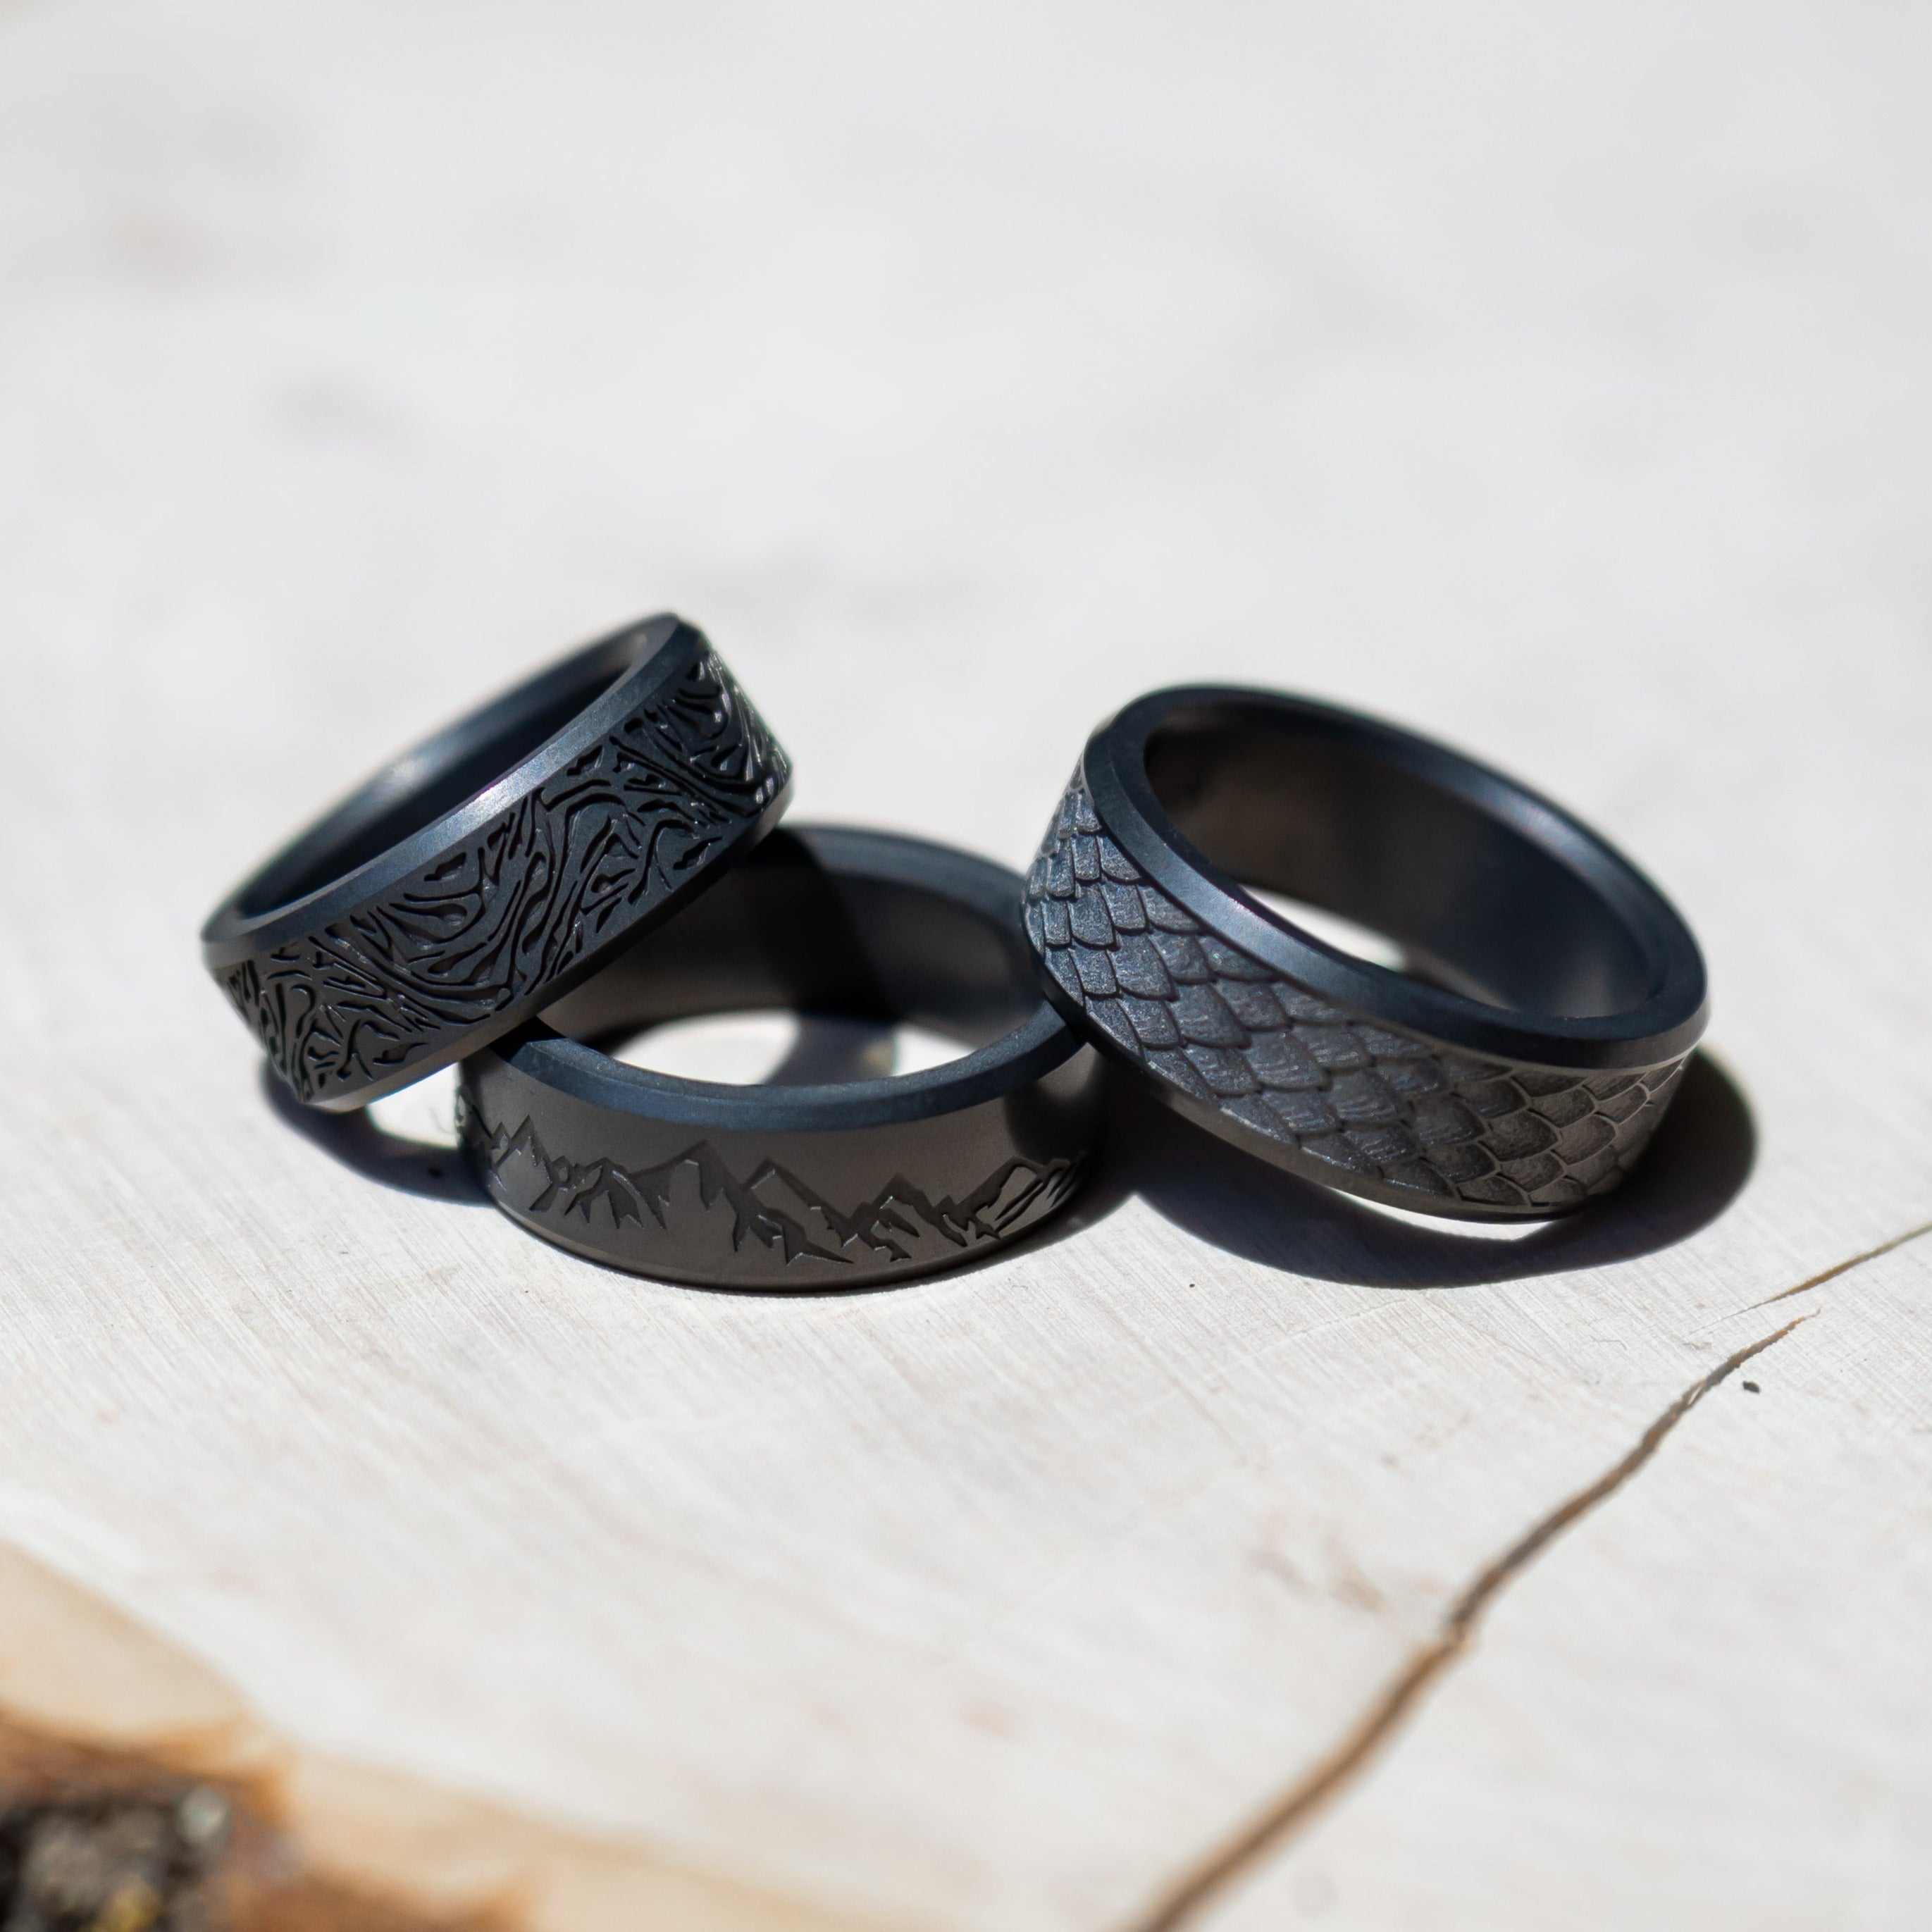 Design your own custom men's wedding ring and let every detail reflect the  uniqueness of your love story. View more men's wedding ring… | Instagram